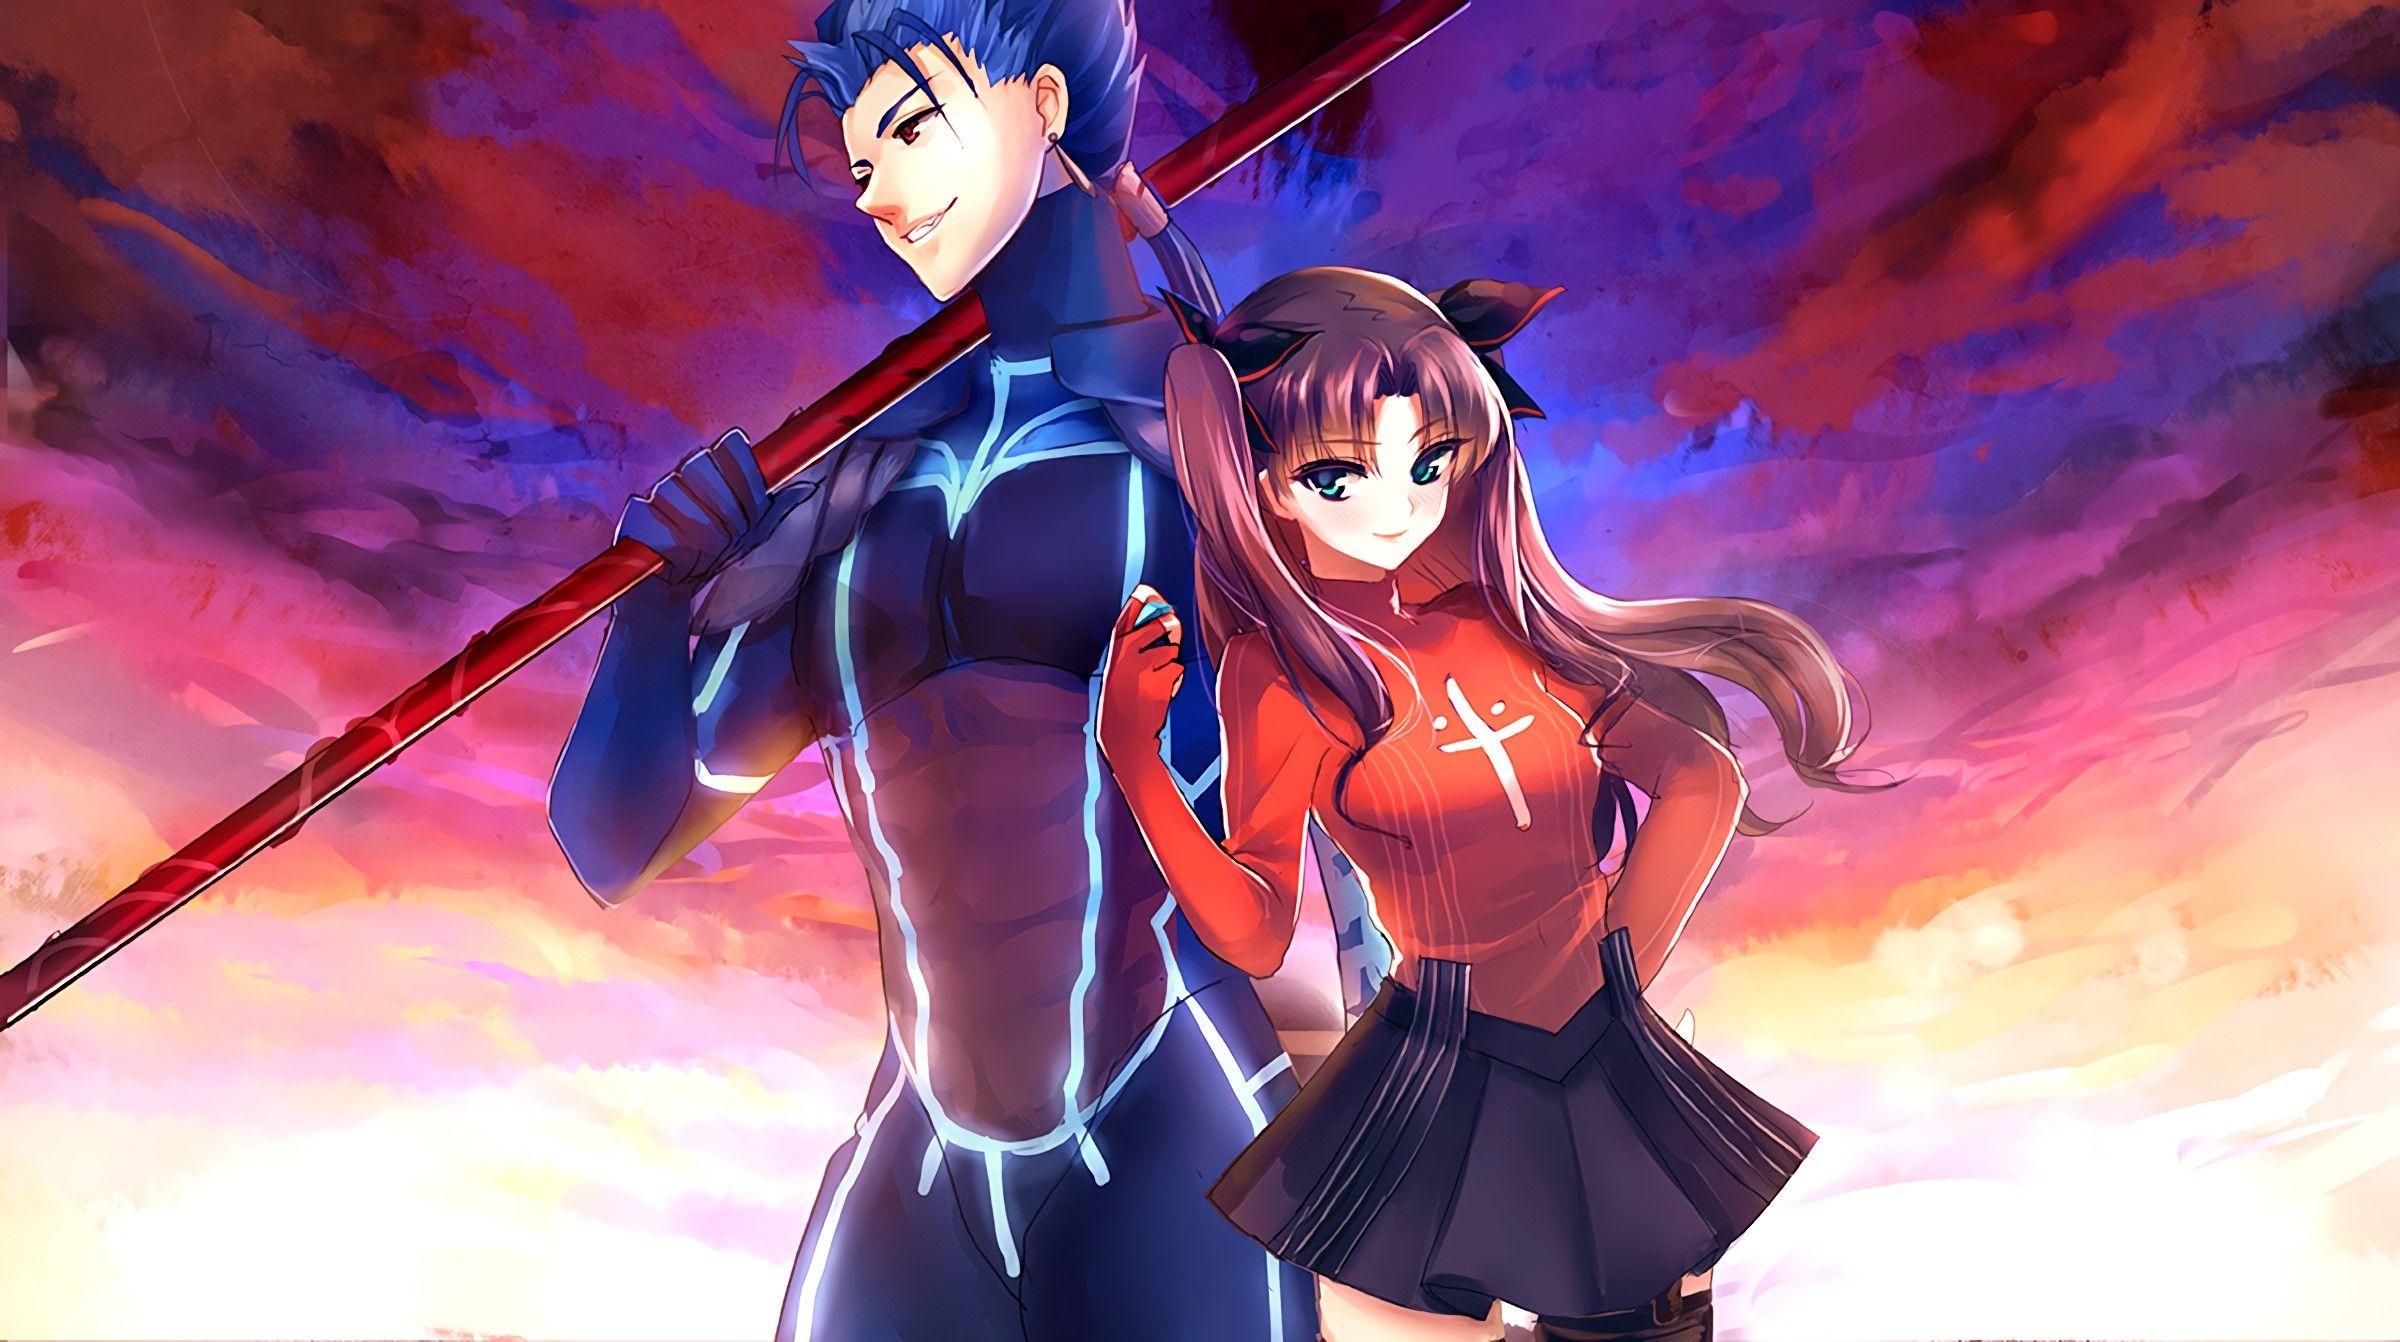 Papel de parede : Fate Stay Night Unlimited Blade Works, Lancer